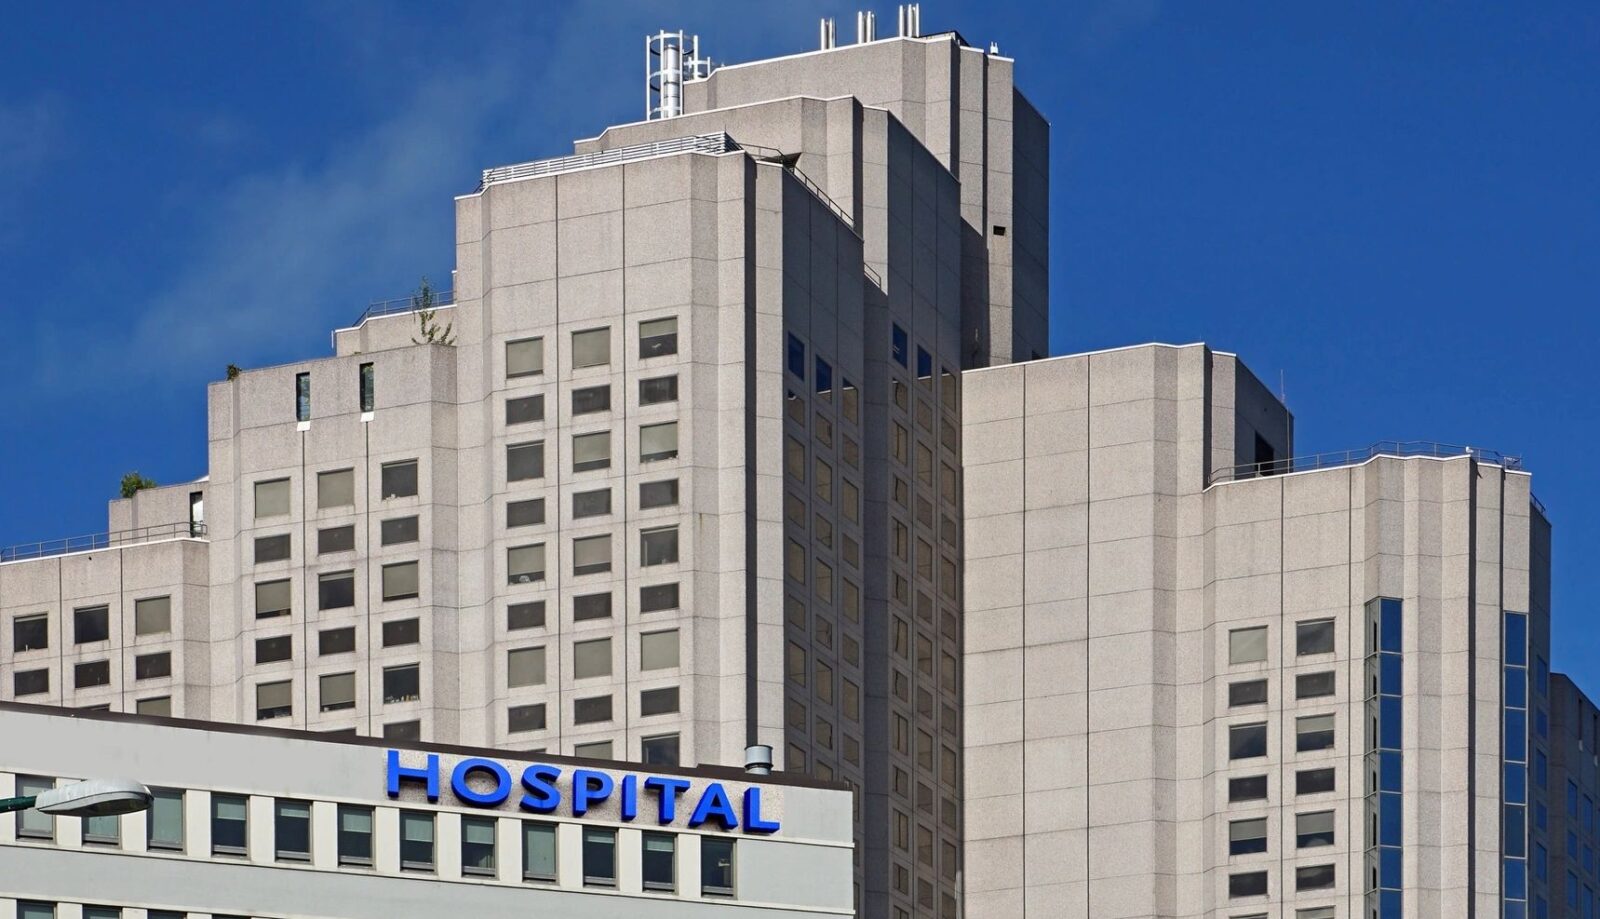 tall white facade buildings against a blue sky; one building has the word hospital in blue letters